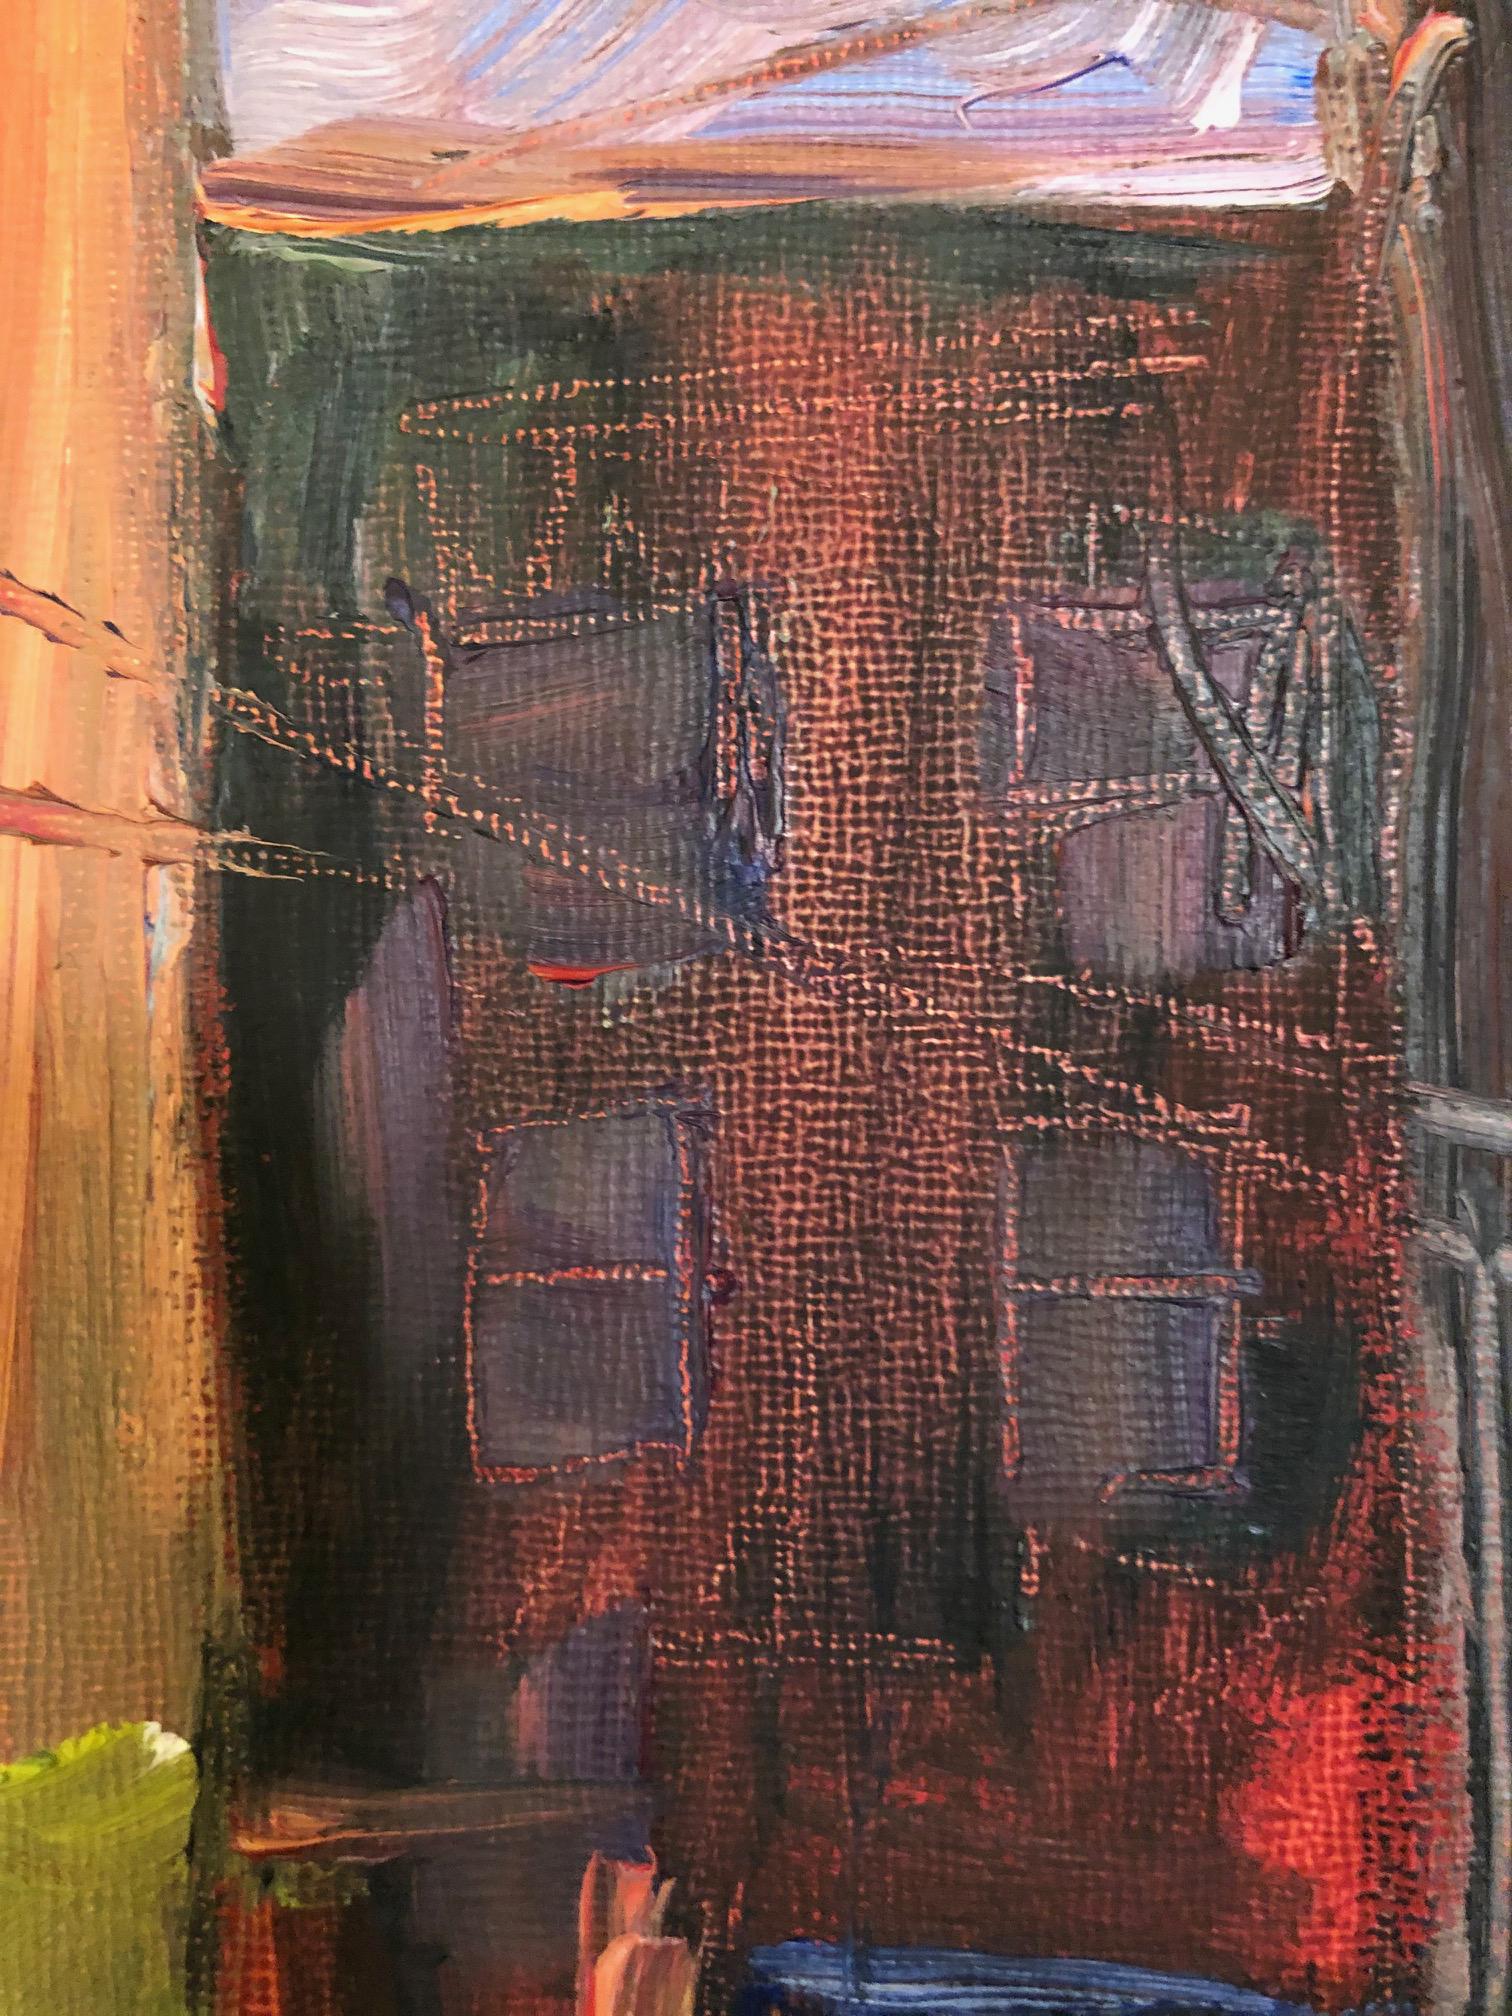 “Studio Canal” by Catherine Picard-Gibbs is a textural urban scene depicting strong sunlight illuminating a factory studio building at dusk. This effect is achieved by the use of brilliant oranges and reds for the building, contrasted with the water